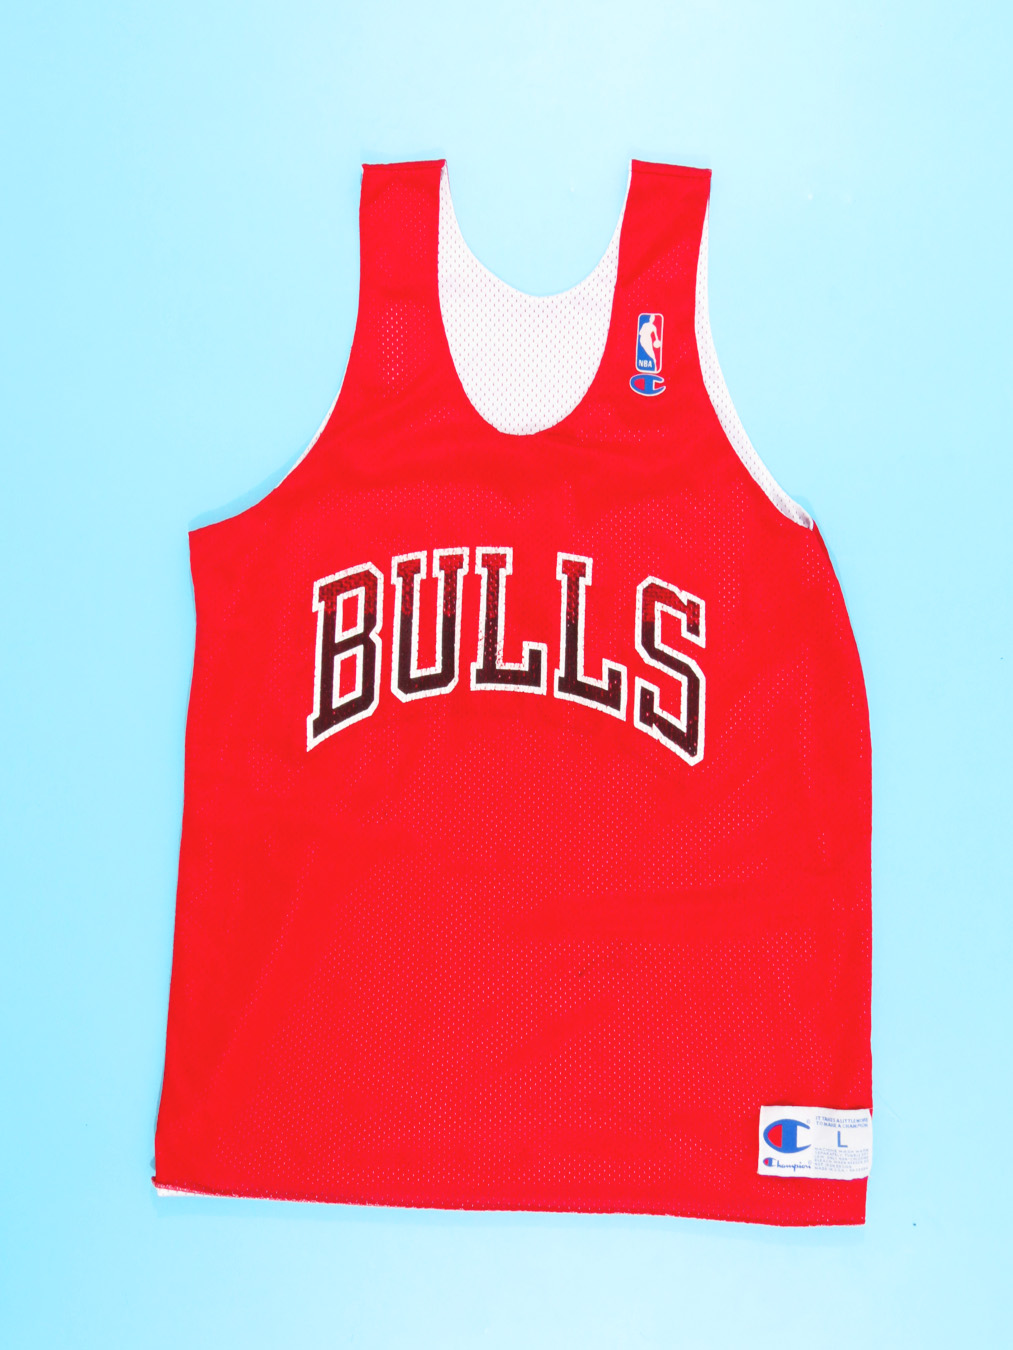 New 'Statement' Bulls jerseys throw it back to the 90s